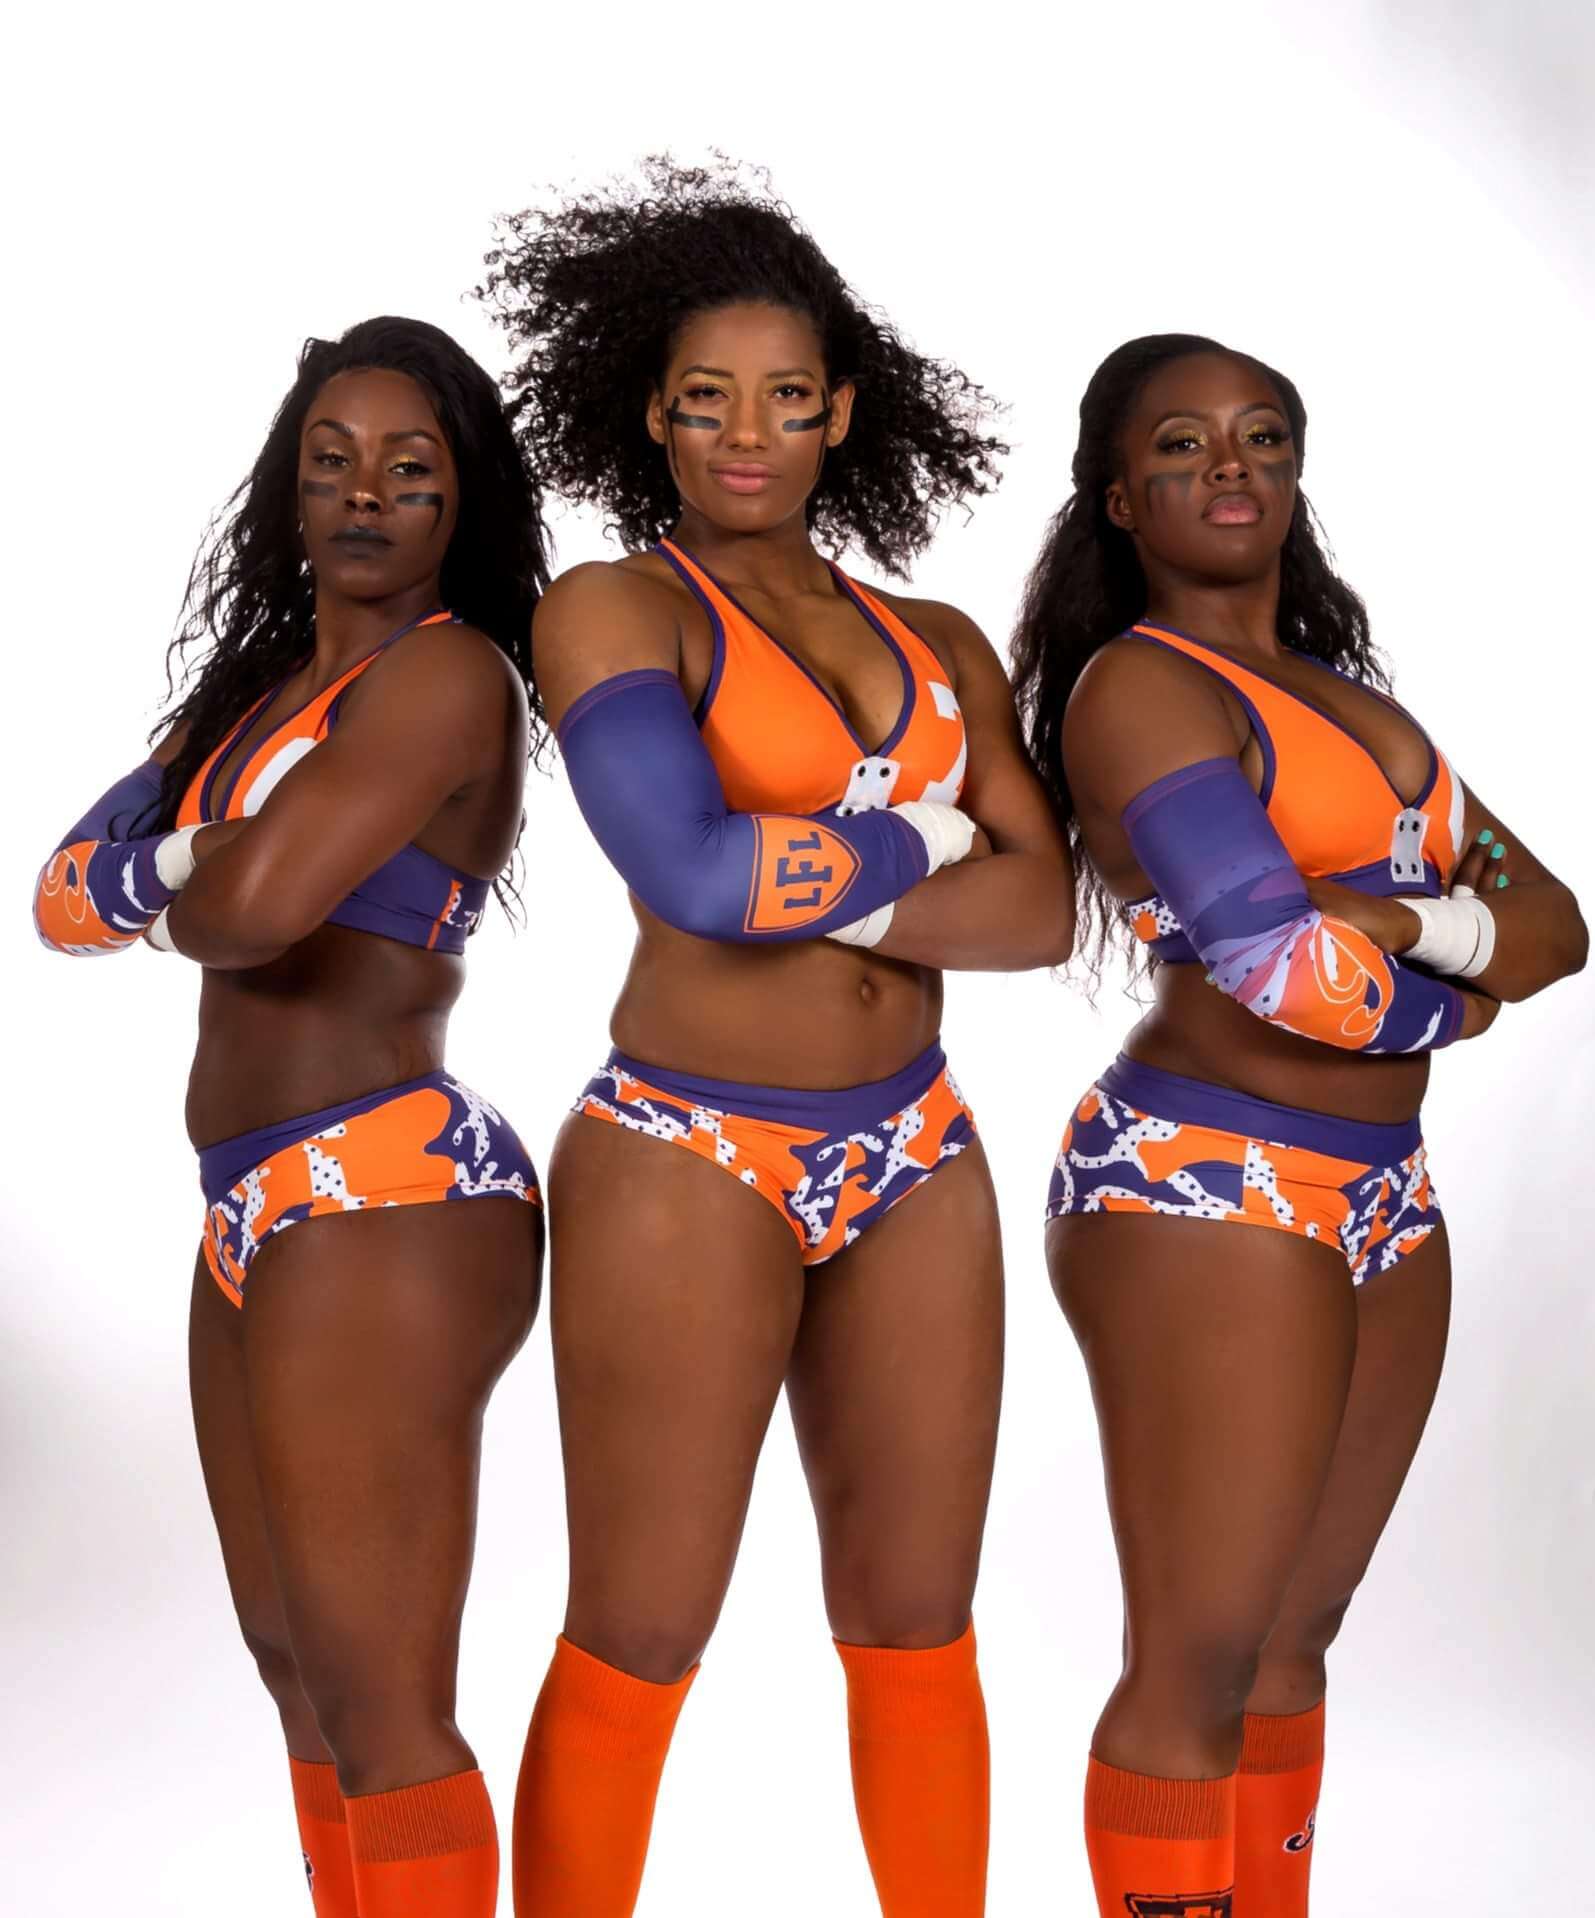 The Legends Football League Beautiful Women And Football, Need We Say Anymore! 81